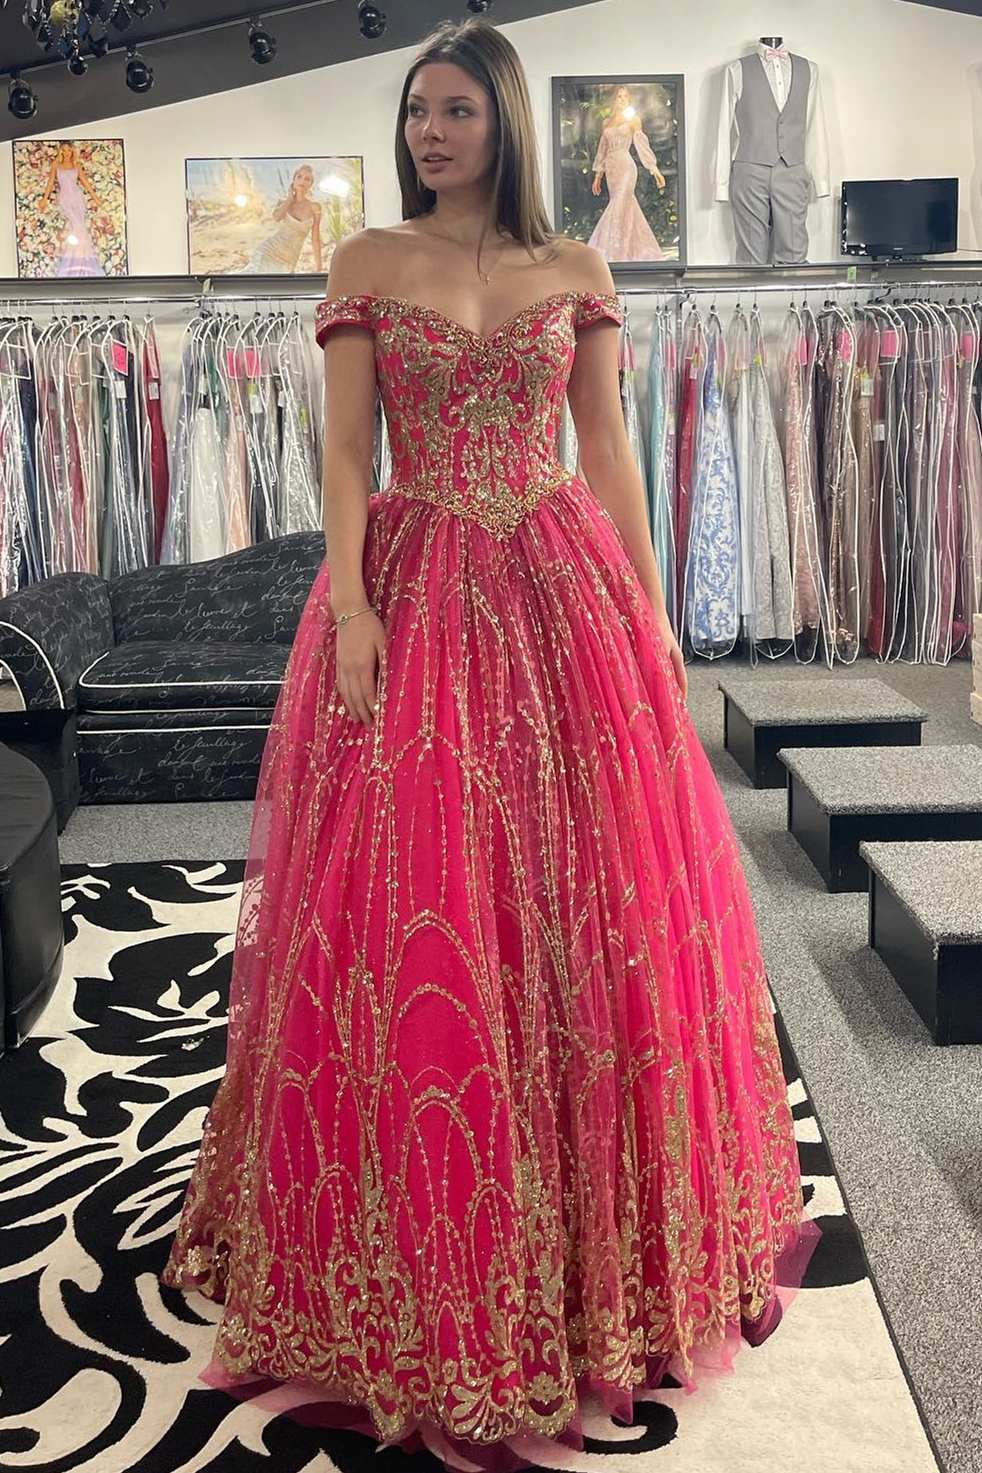 Princess Off-the-Shoulder Red Sequin Lace Ball Gown